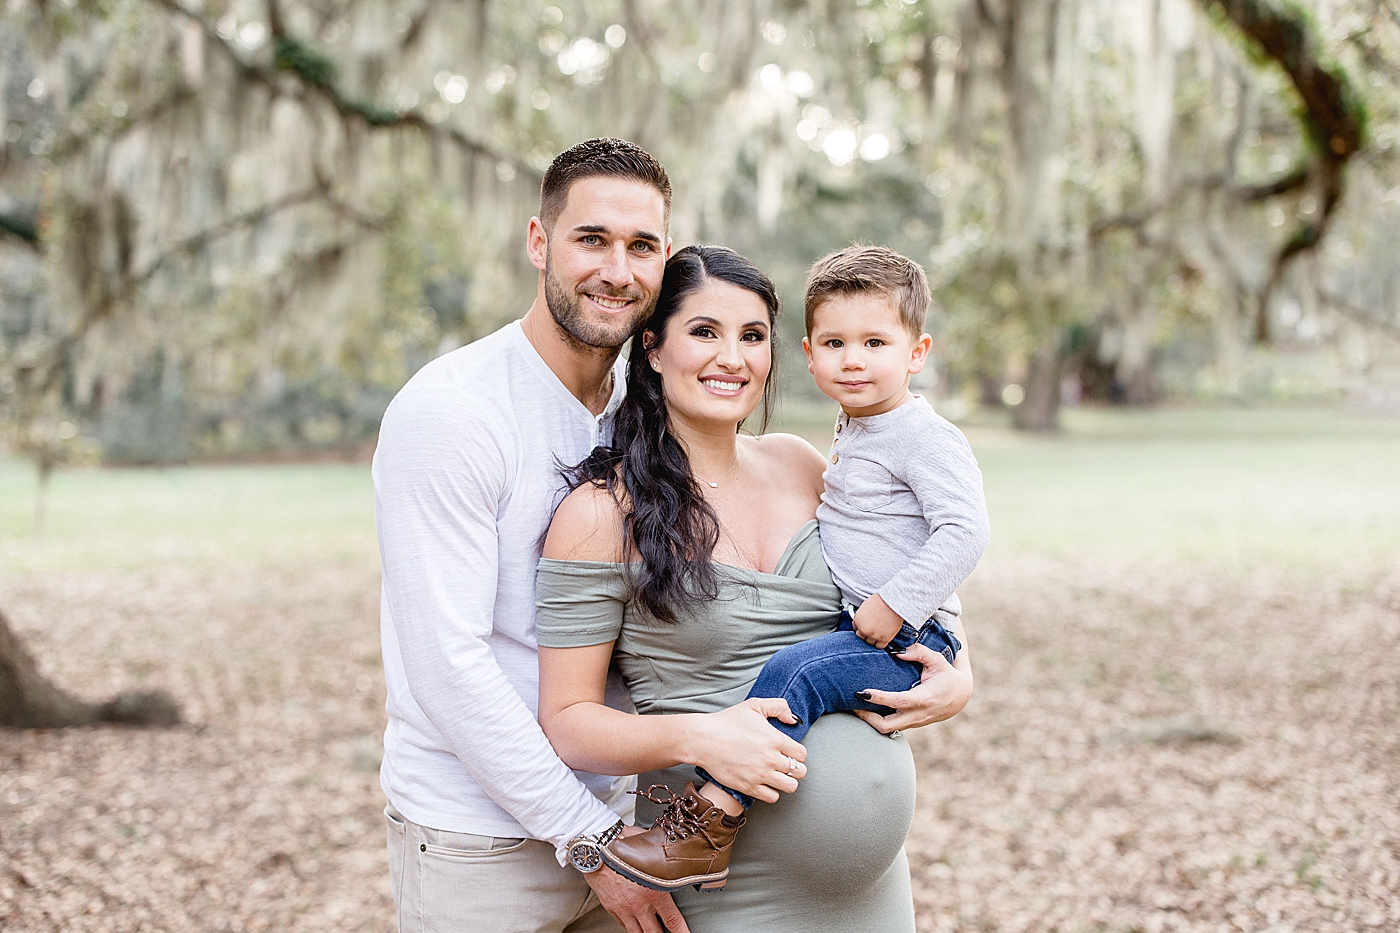 The Kiermaier Family Welcomes Baby Boy